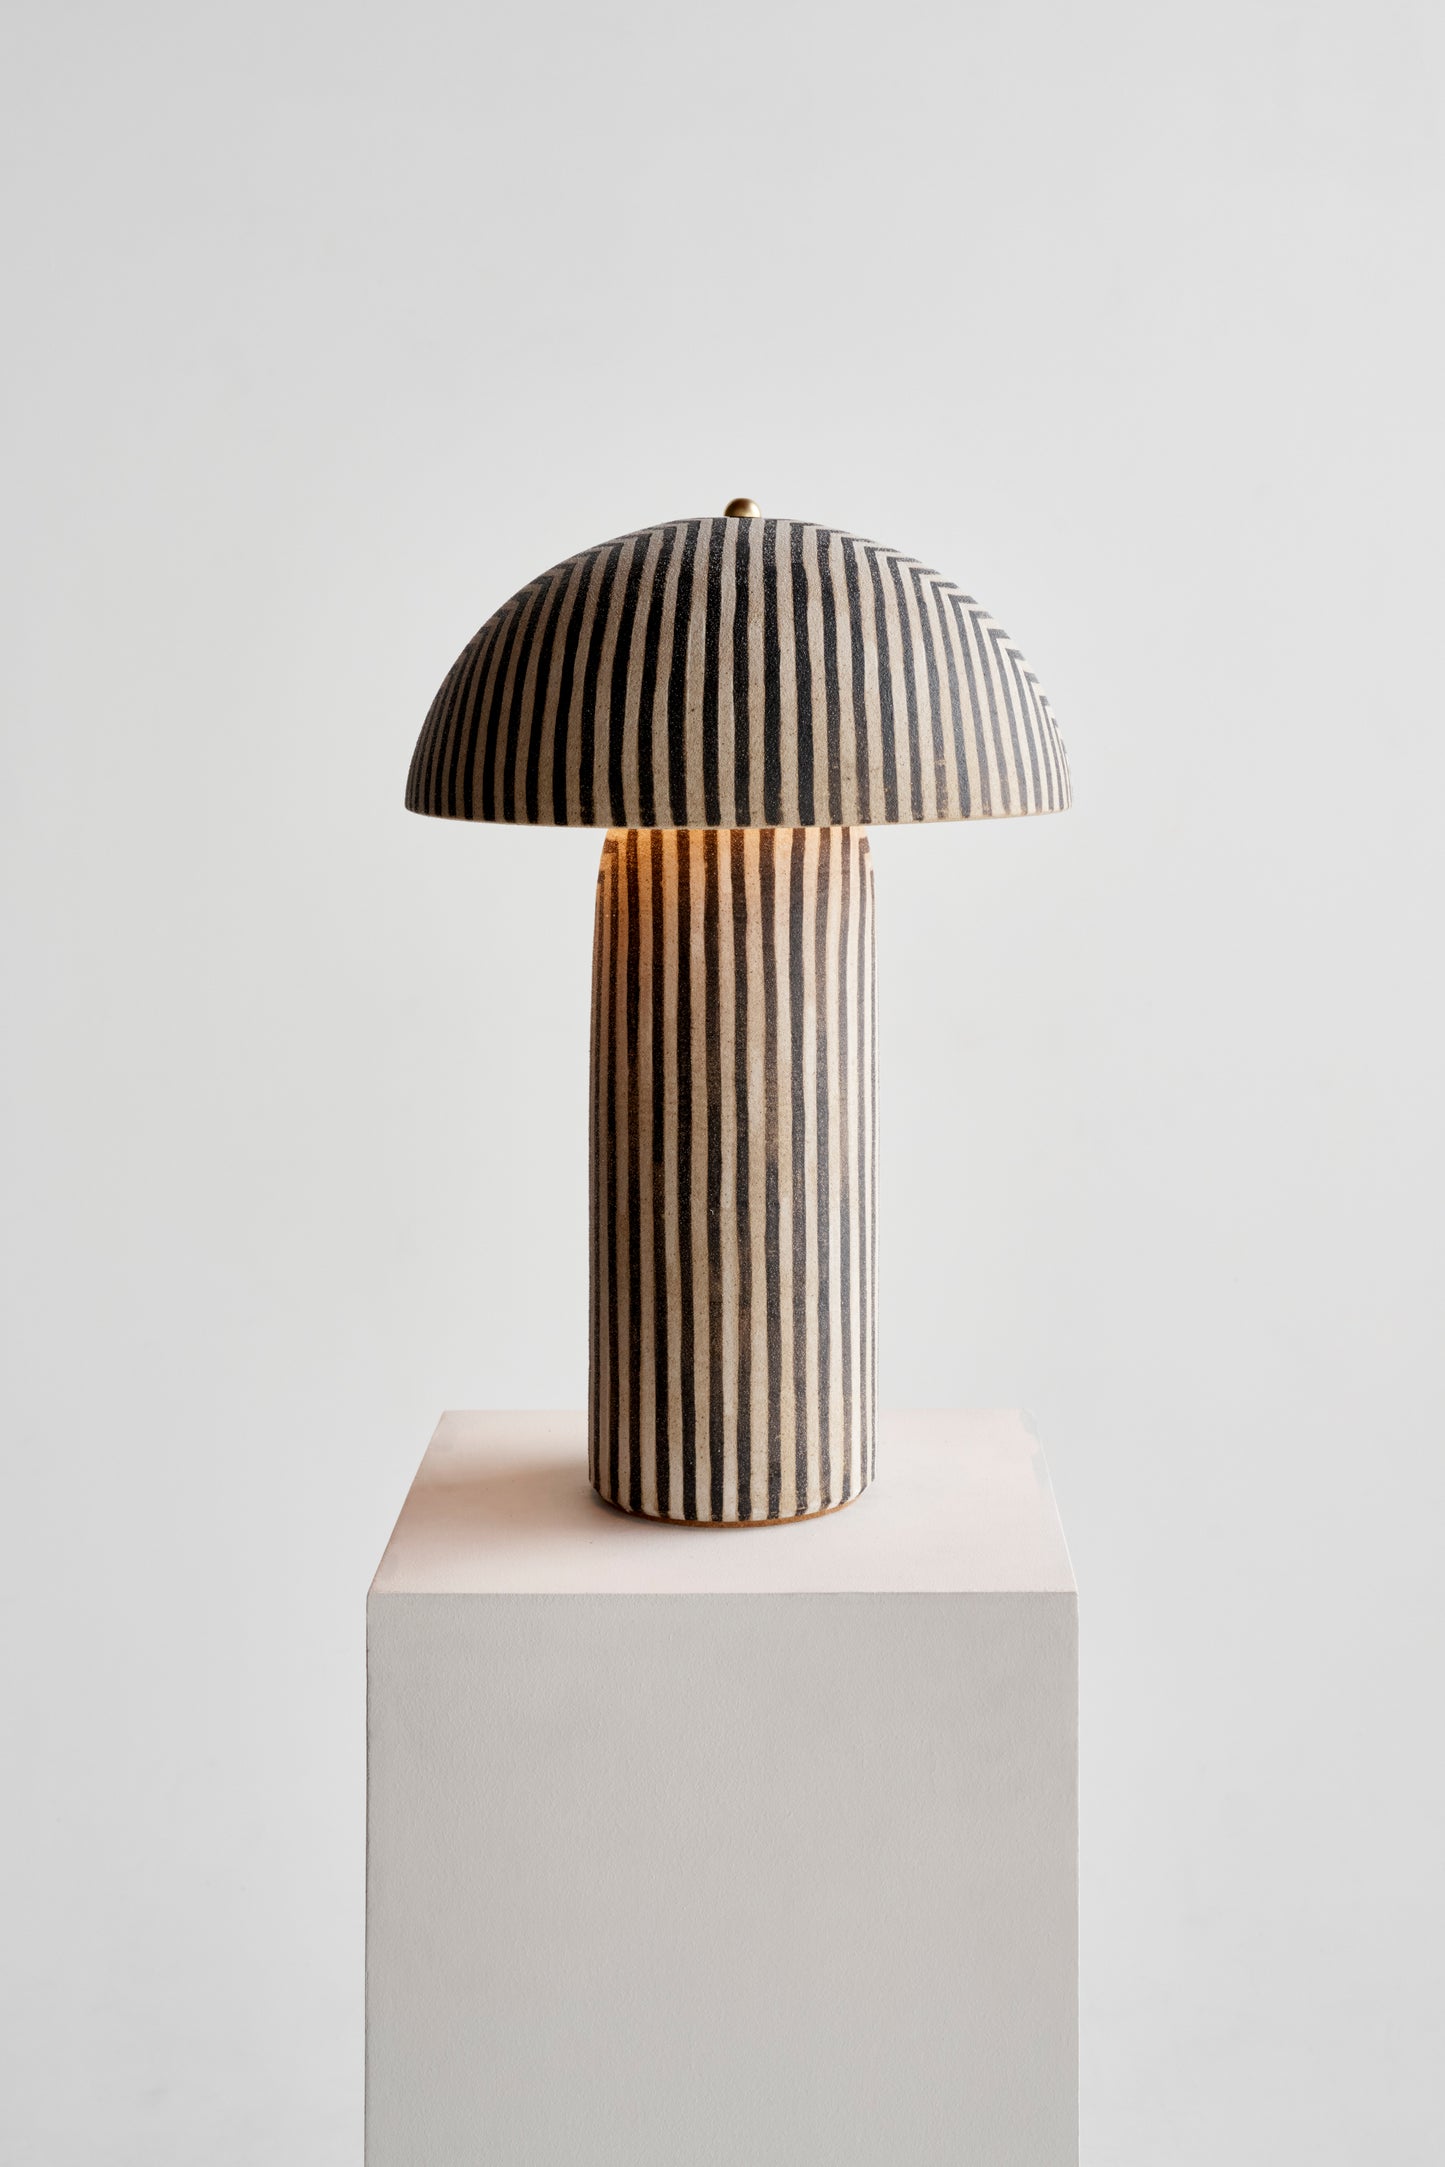 Ceramicah Tera Lamp Stripe with Stripe Shade Extra Large turned on